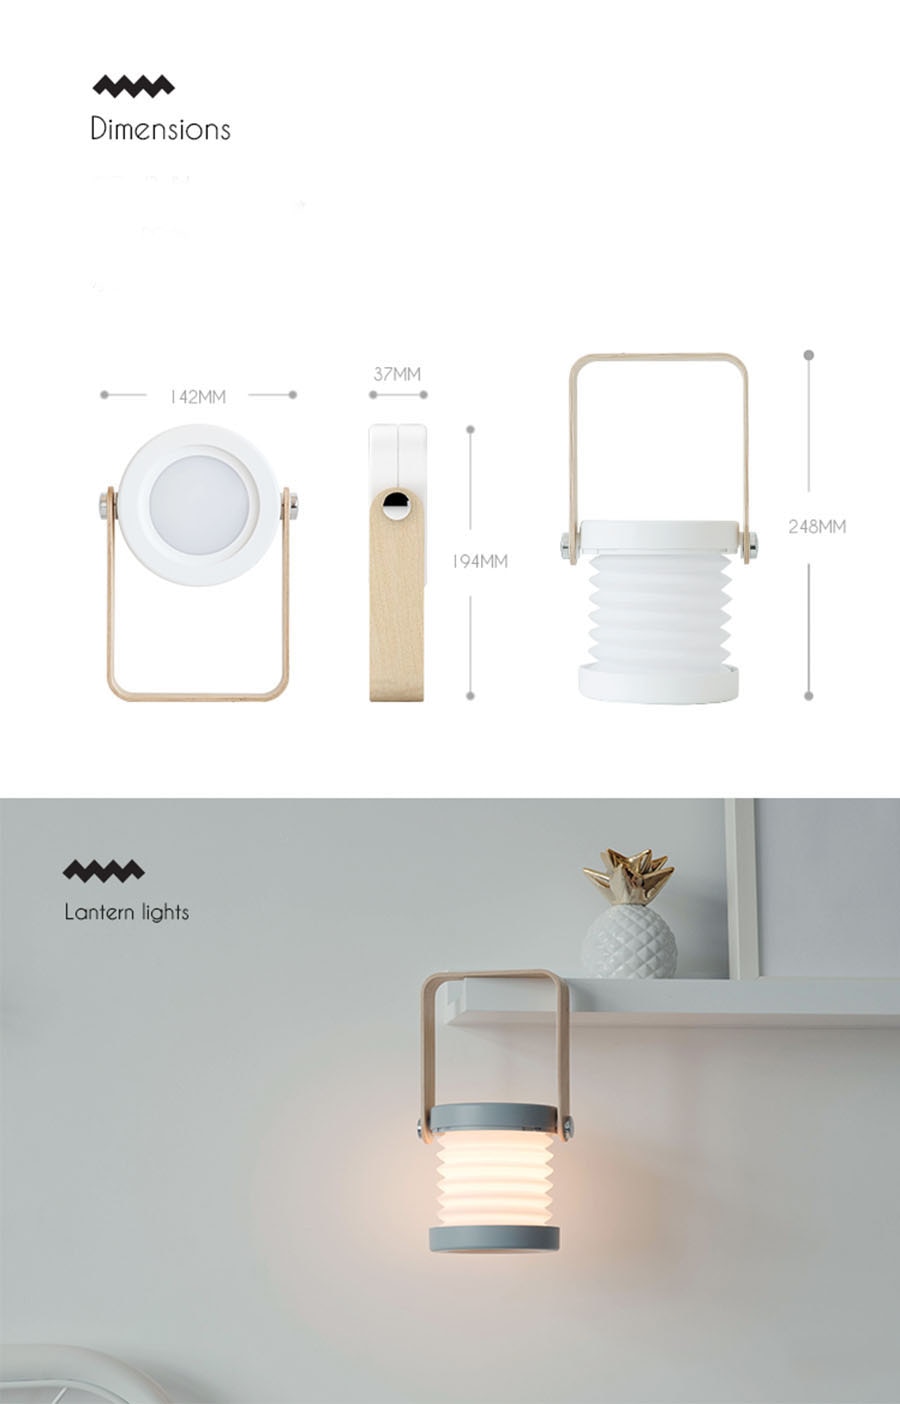 Foldable Touch Dimmable Reading LED Night Light Portable Lantern Lamp USB Rechargeable for Children Kids Gift Bedside Bedroom